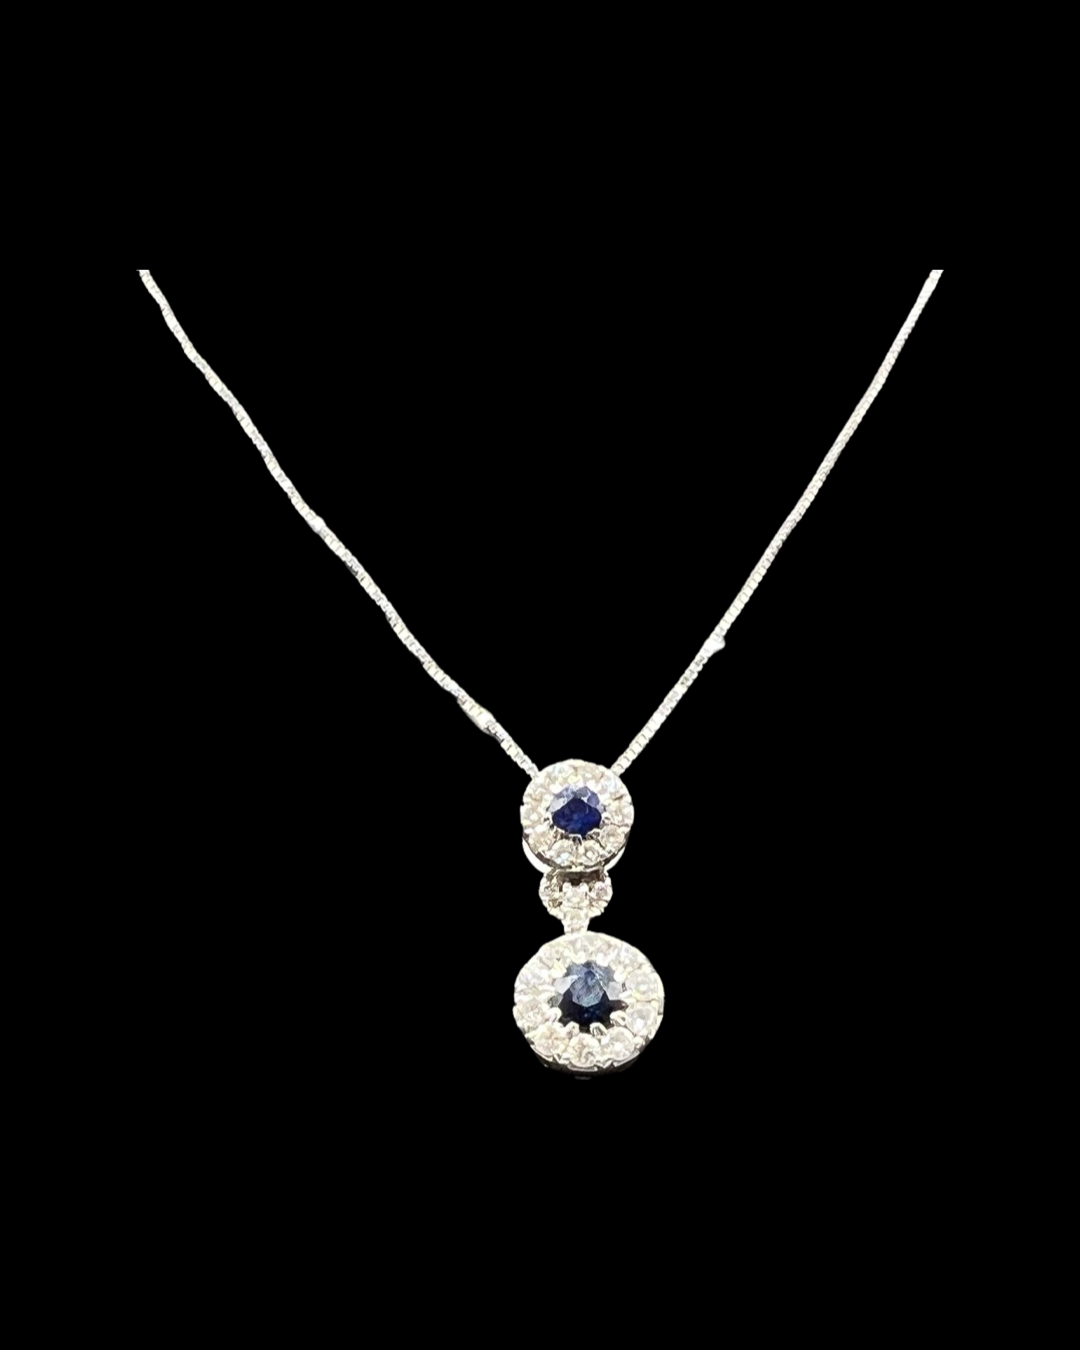 18ct White Gold Diamond & Sapphire Pendant & Chain 42cm in length - Very Good Condition 2.3grams - Image 2 of 2